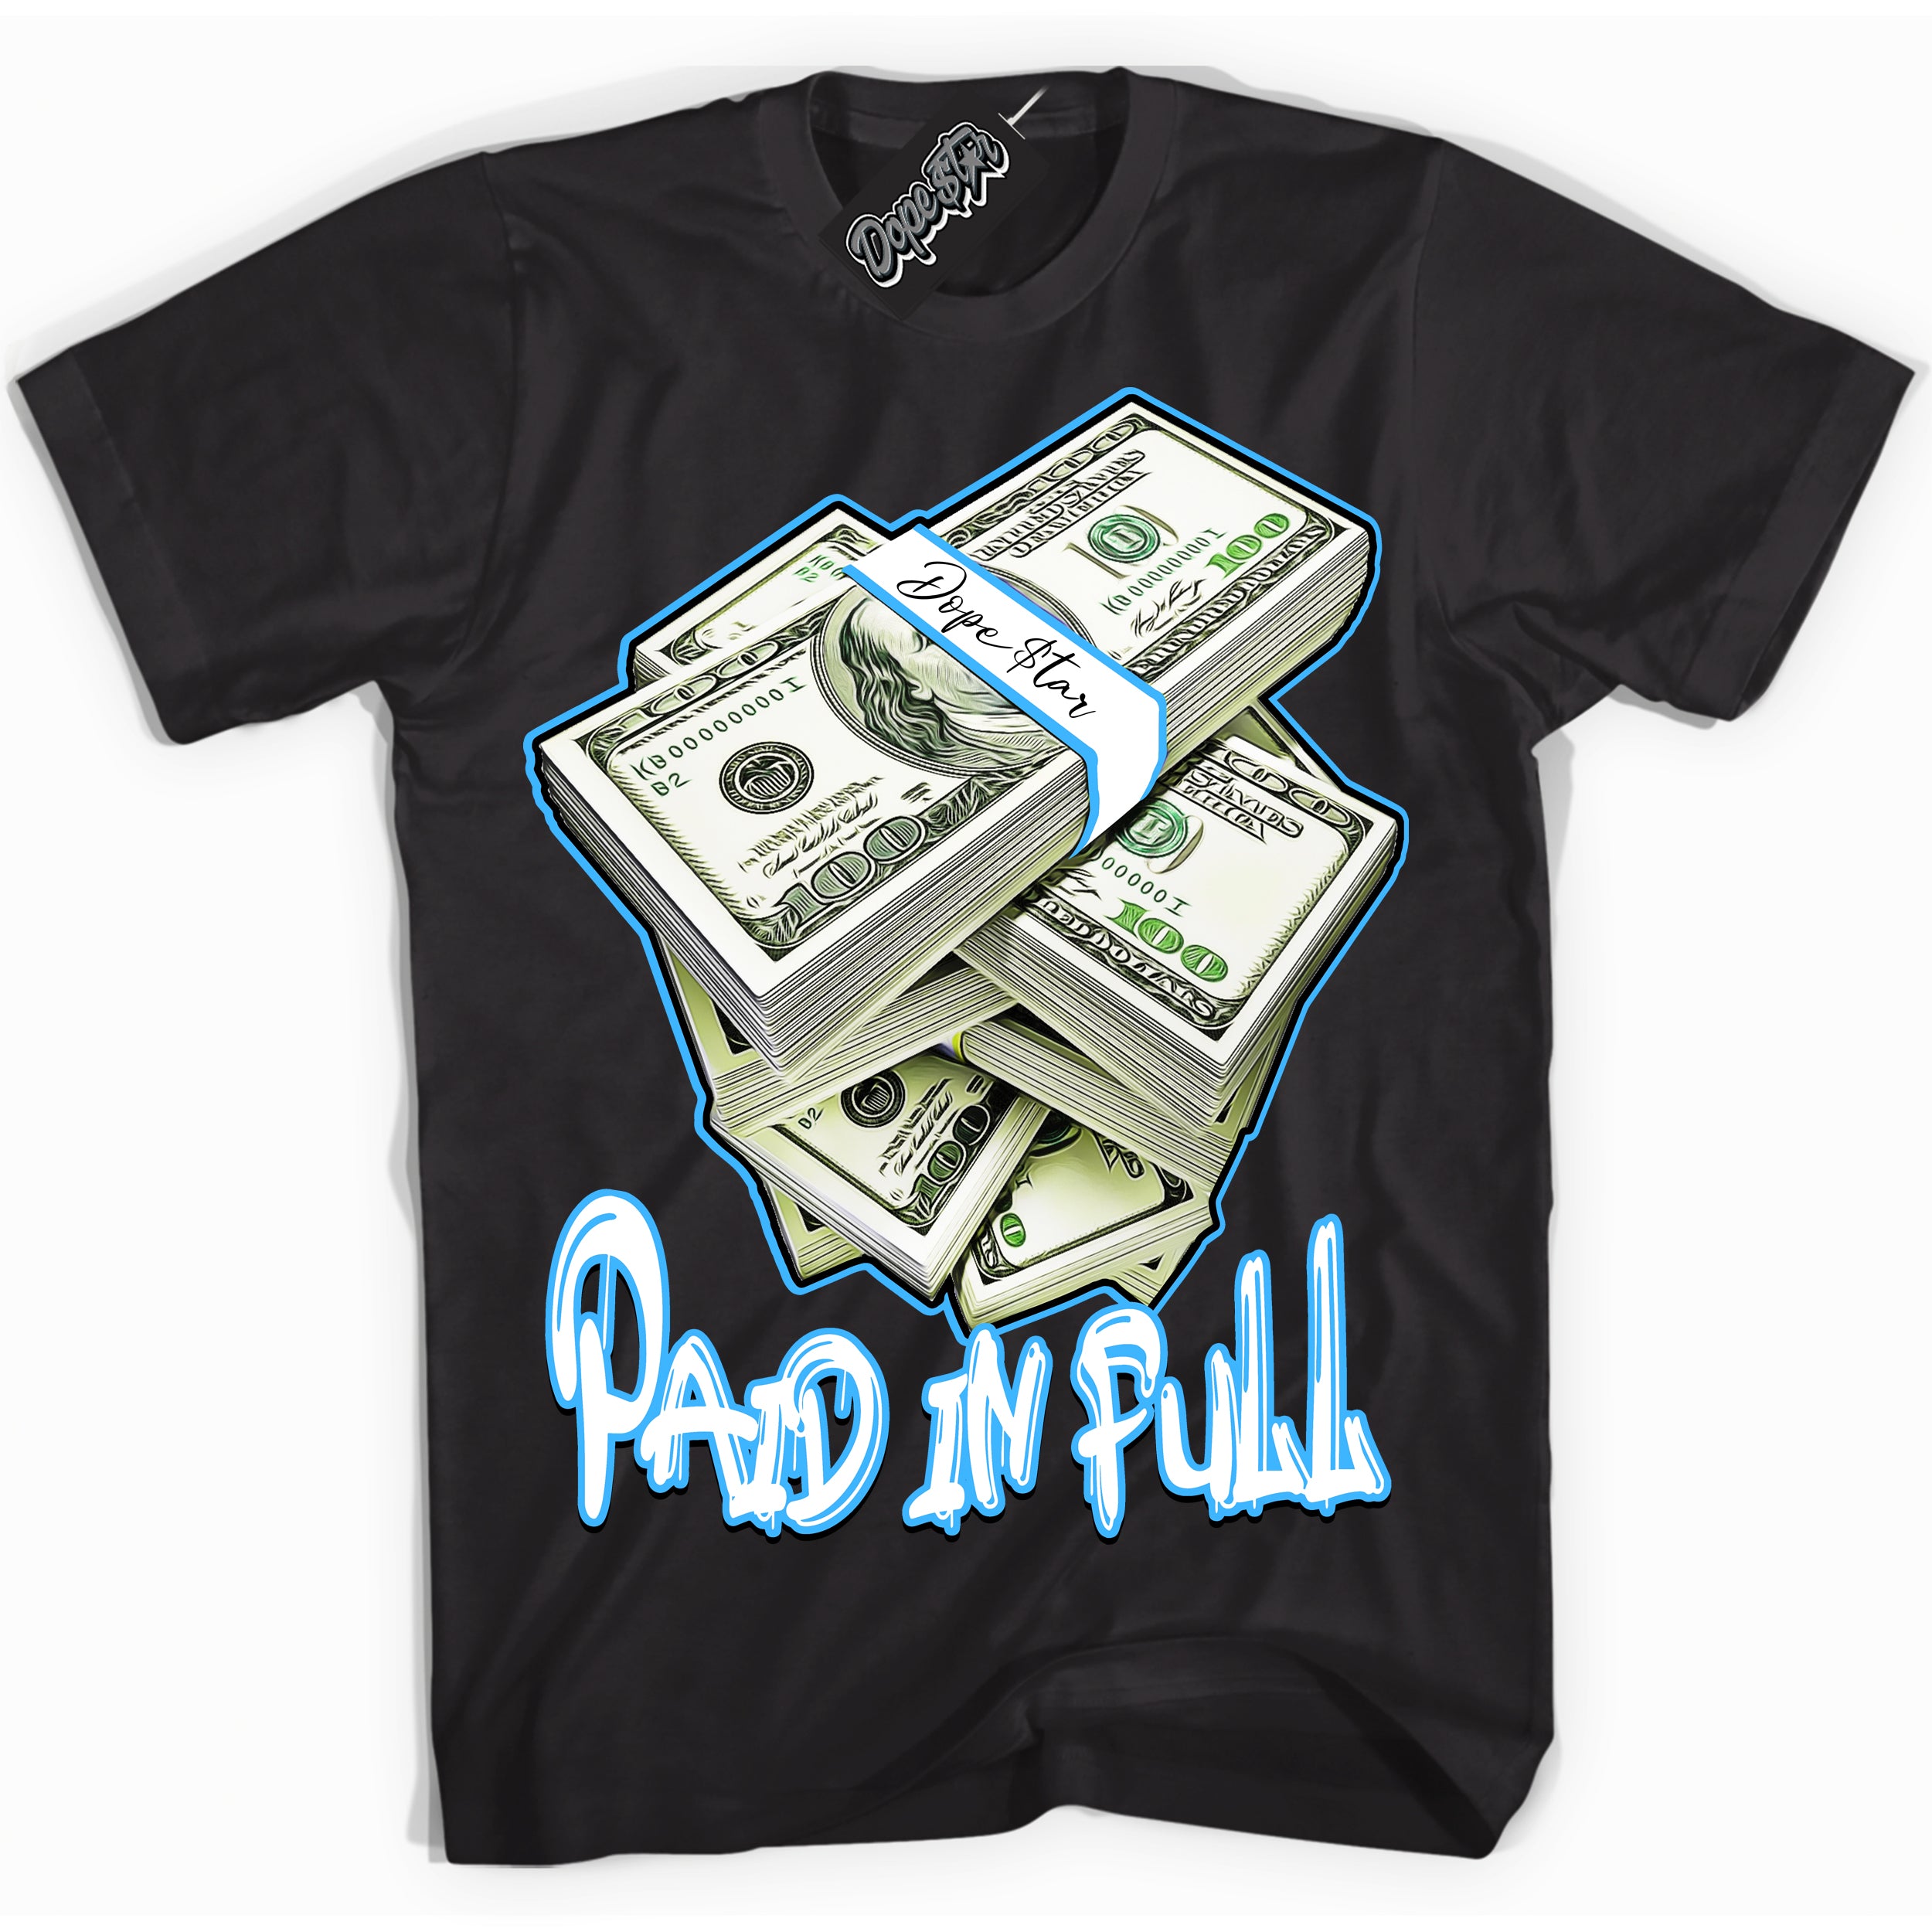 Cool Black graphic tee with “ Paid In Full ” design, that perfectly matches Powder Blue 9s sneakers 